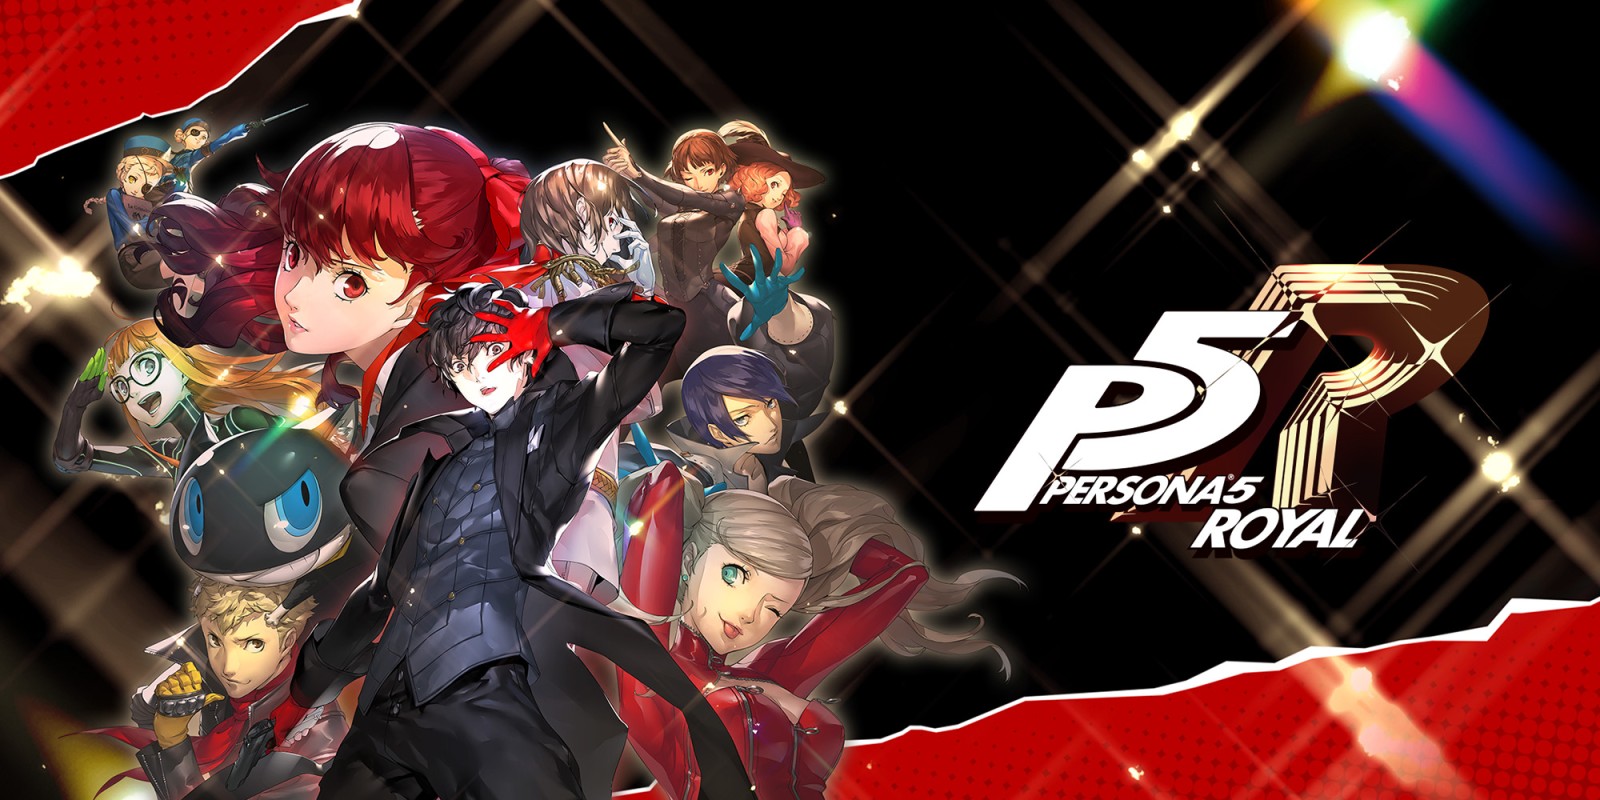 IMAGE(https://fs-prod-cdn.nintendo-europe.com/media/images/10_share_images/games_15/nintendo_switch_download_software_1/2x1_NSwitchDS_Persona5Royal_image1600w.jpg)